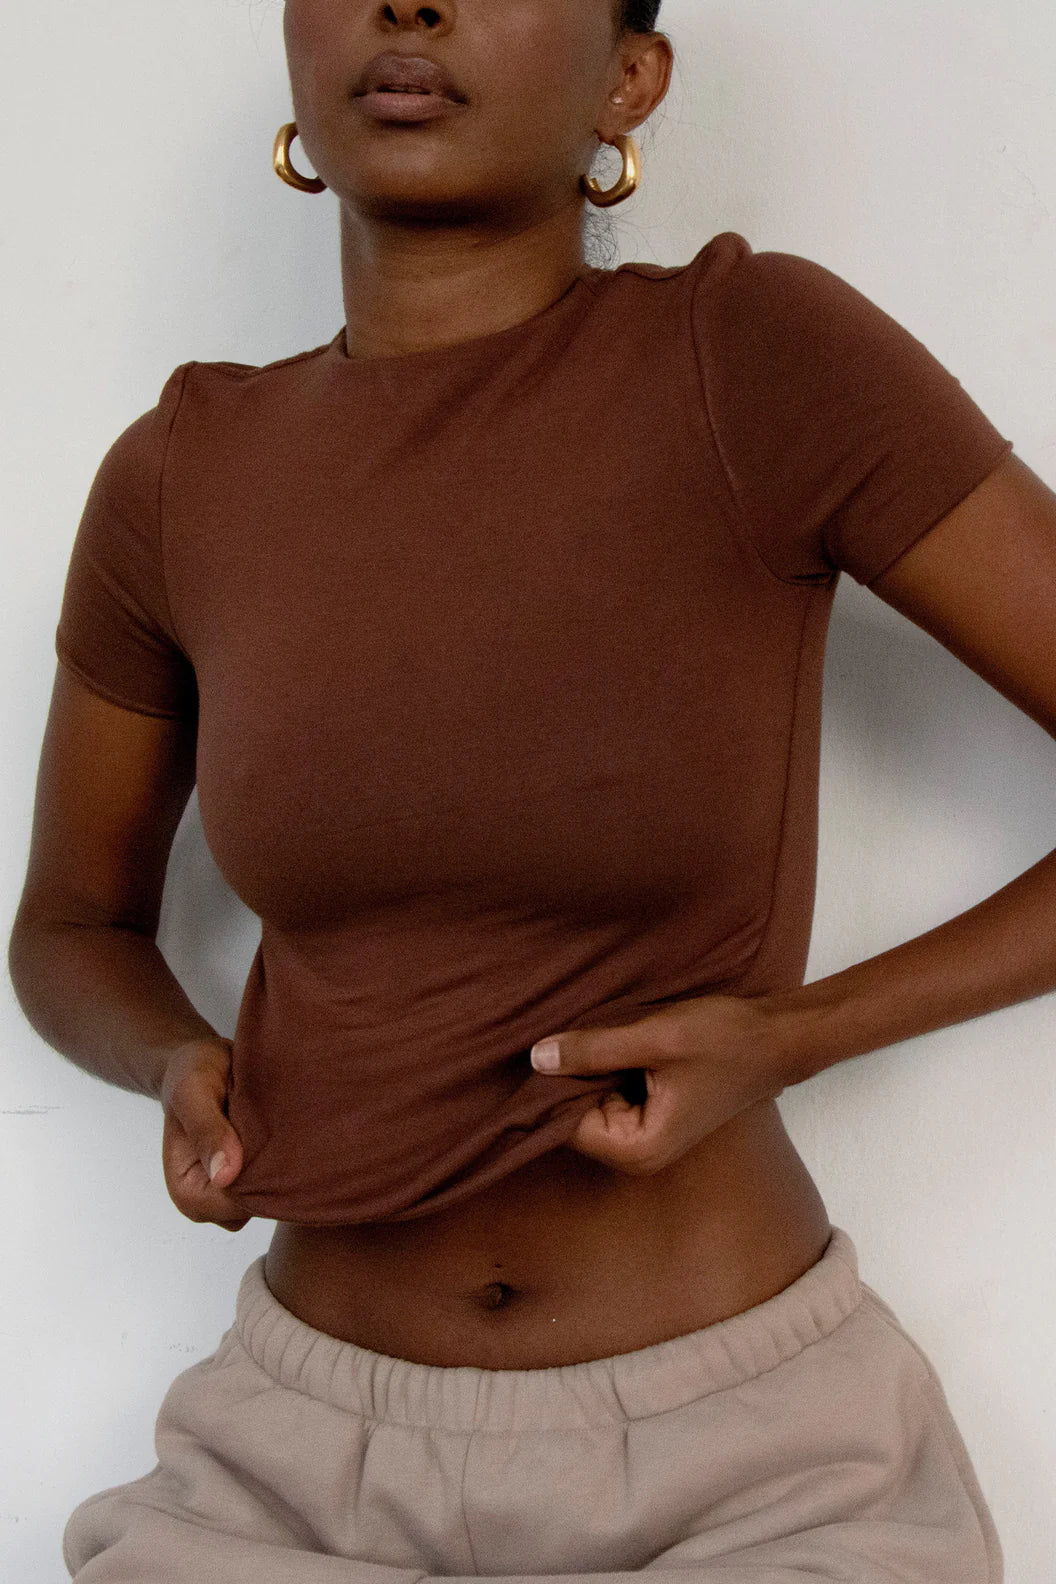 The Basic Brown Top